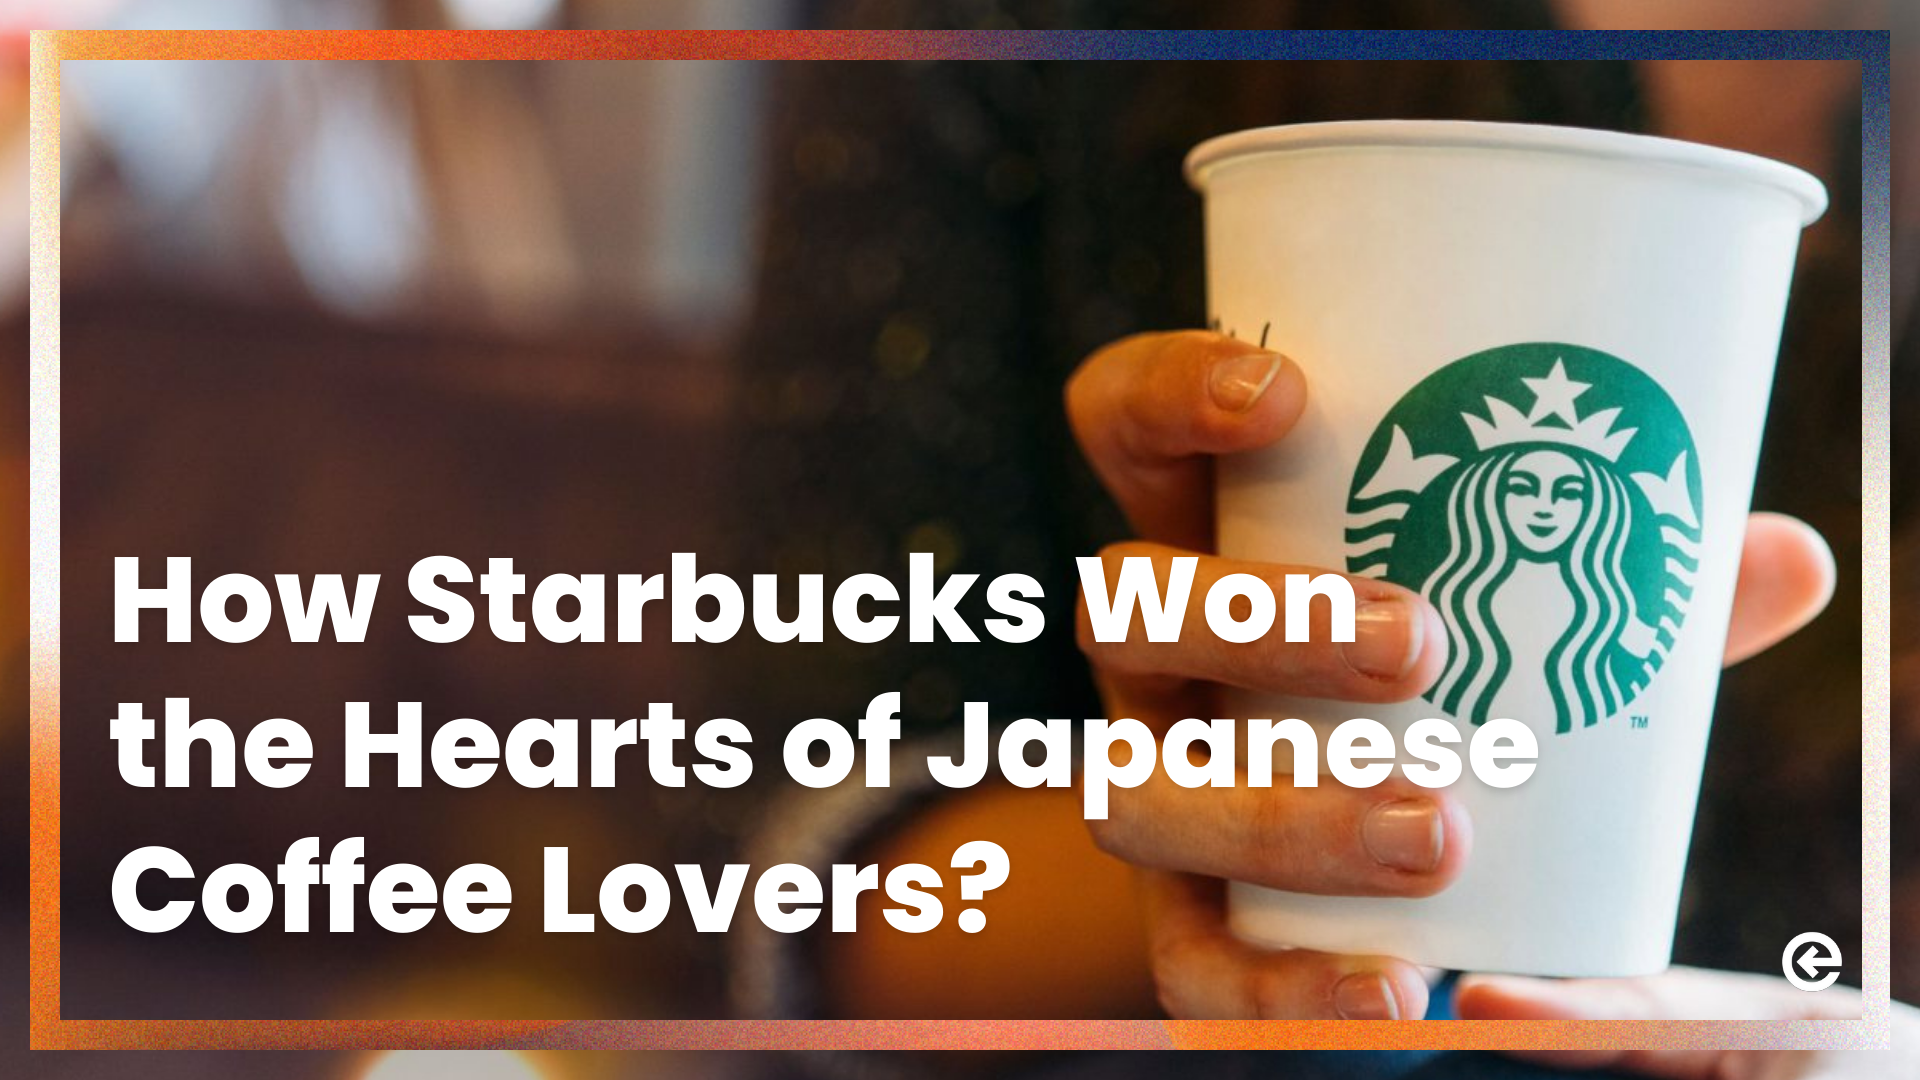 How Starbucks Won the Hearts of Japanese Coffee Lovers?